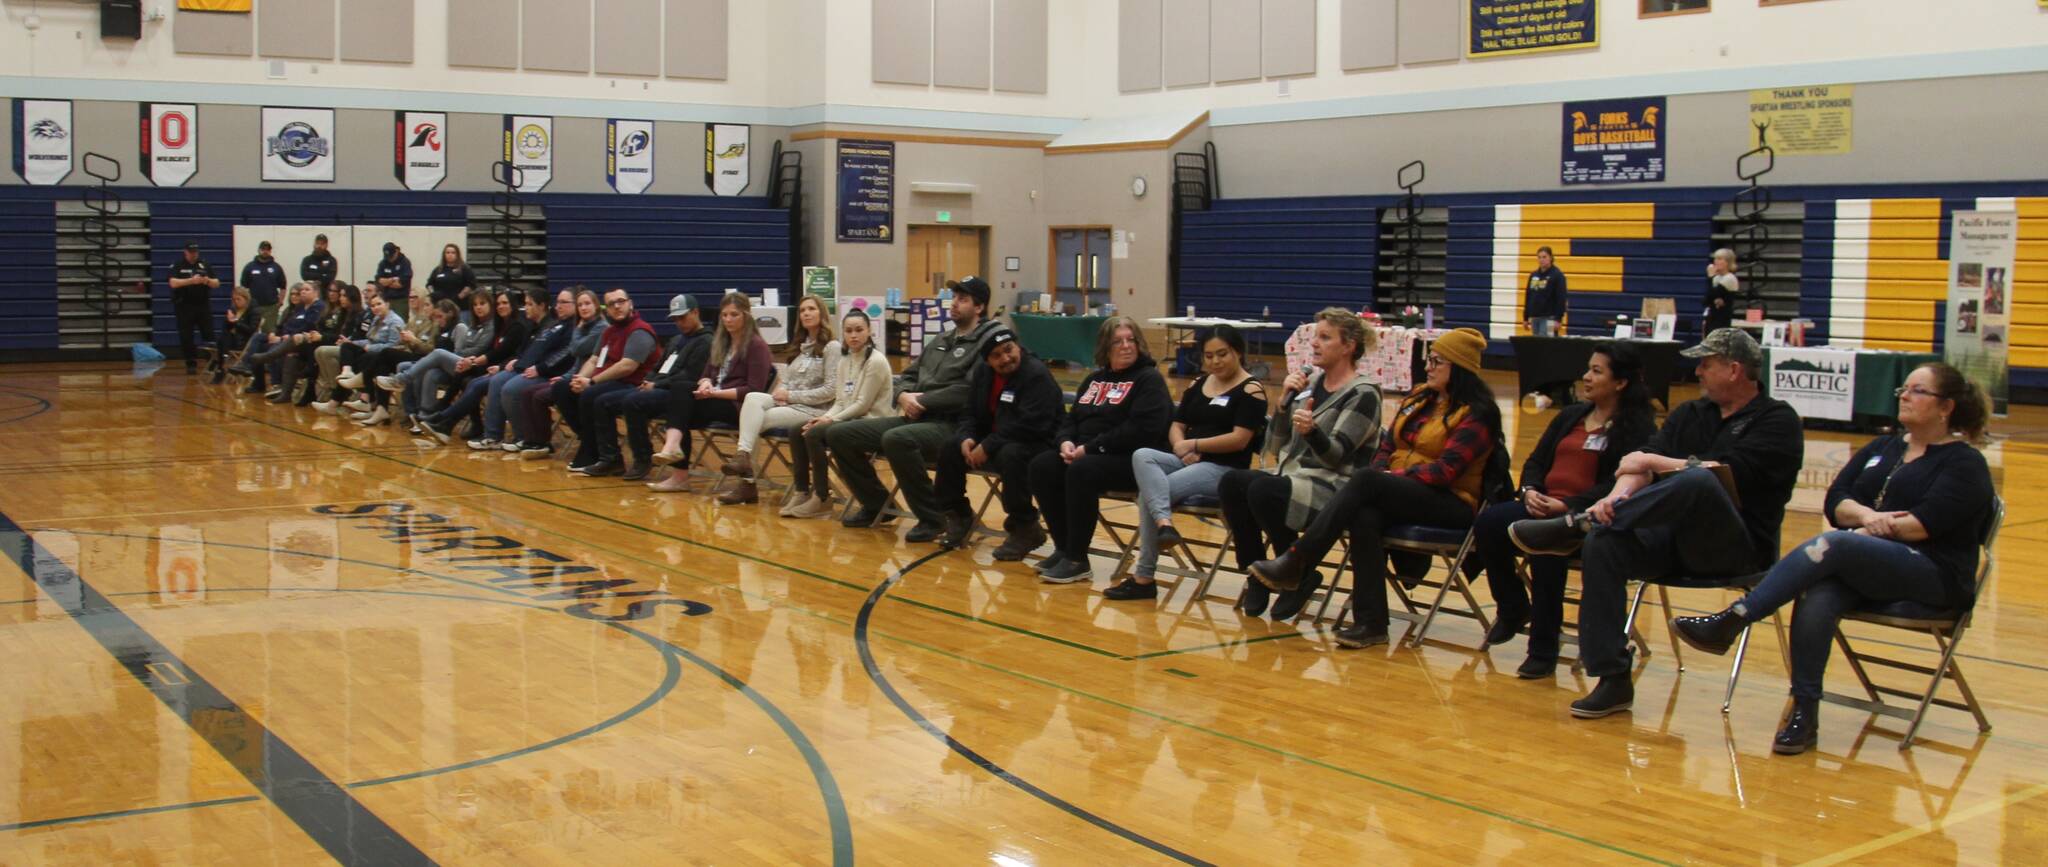 About 20 employers took a moment to talk about their businesses and share tips on seeking employment last Tuesday in the HS Gym. Quite a number of employers also shared that they were FHS grads.